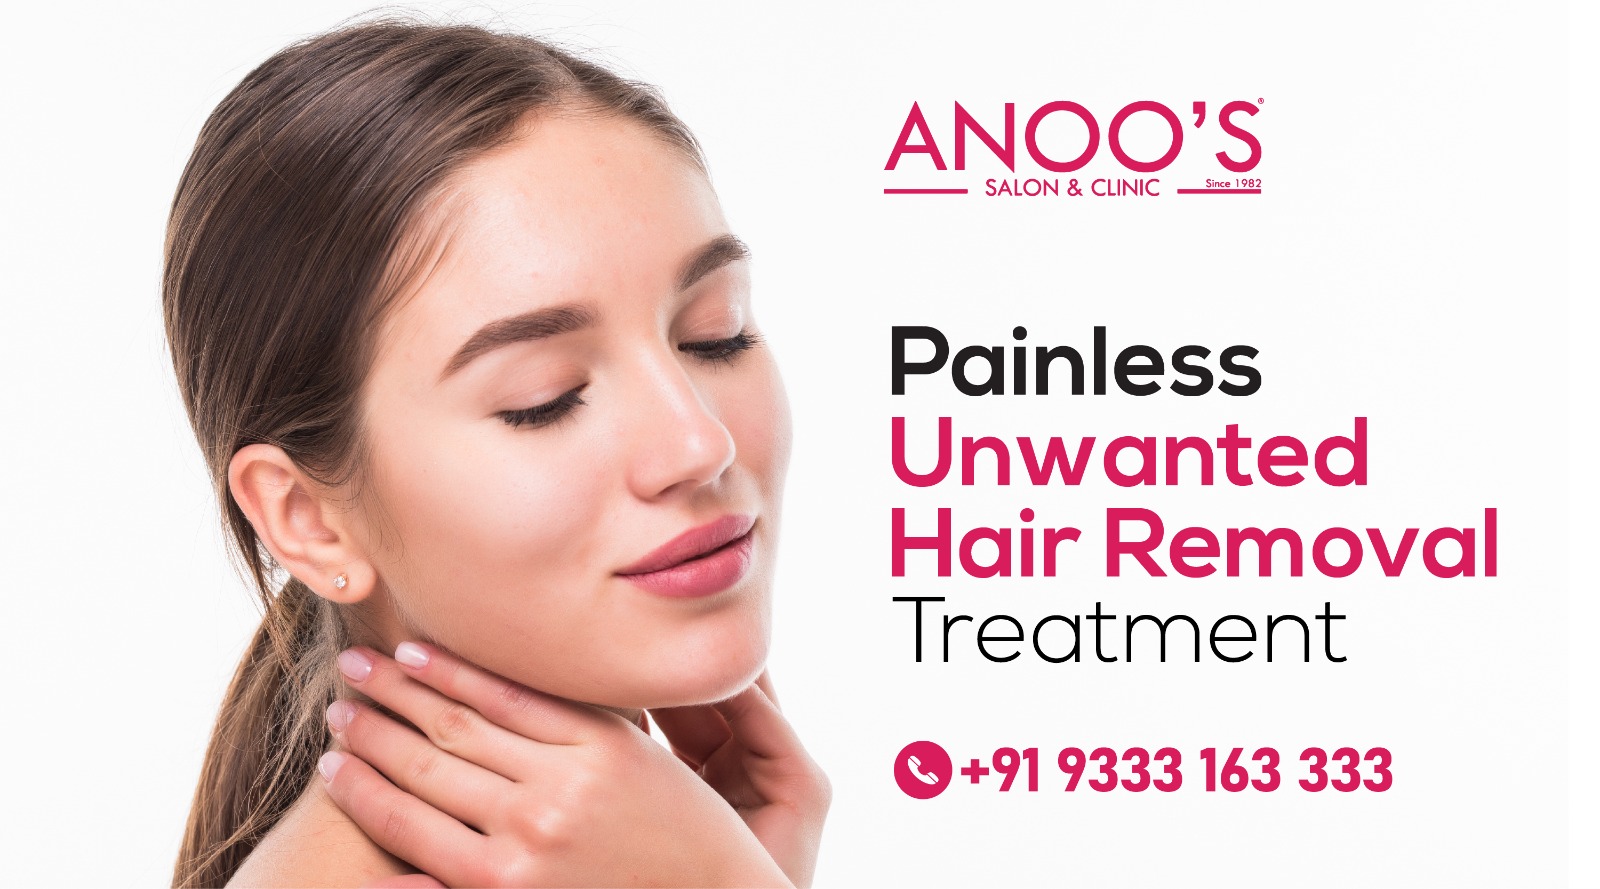 Silent and Smooth: Painless Unwanted Hair Removal Treatment is the Way to Go